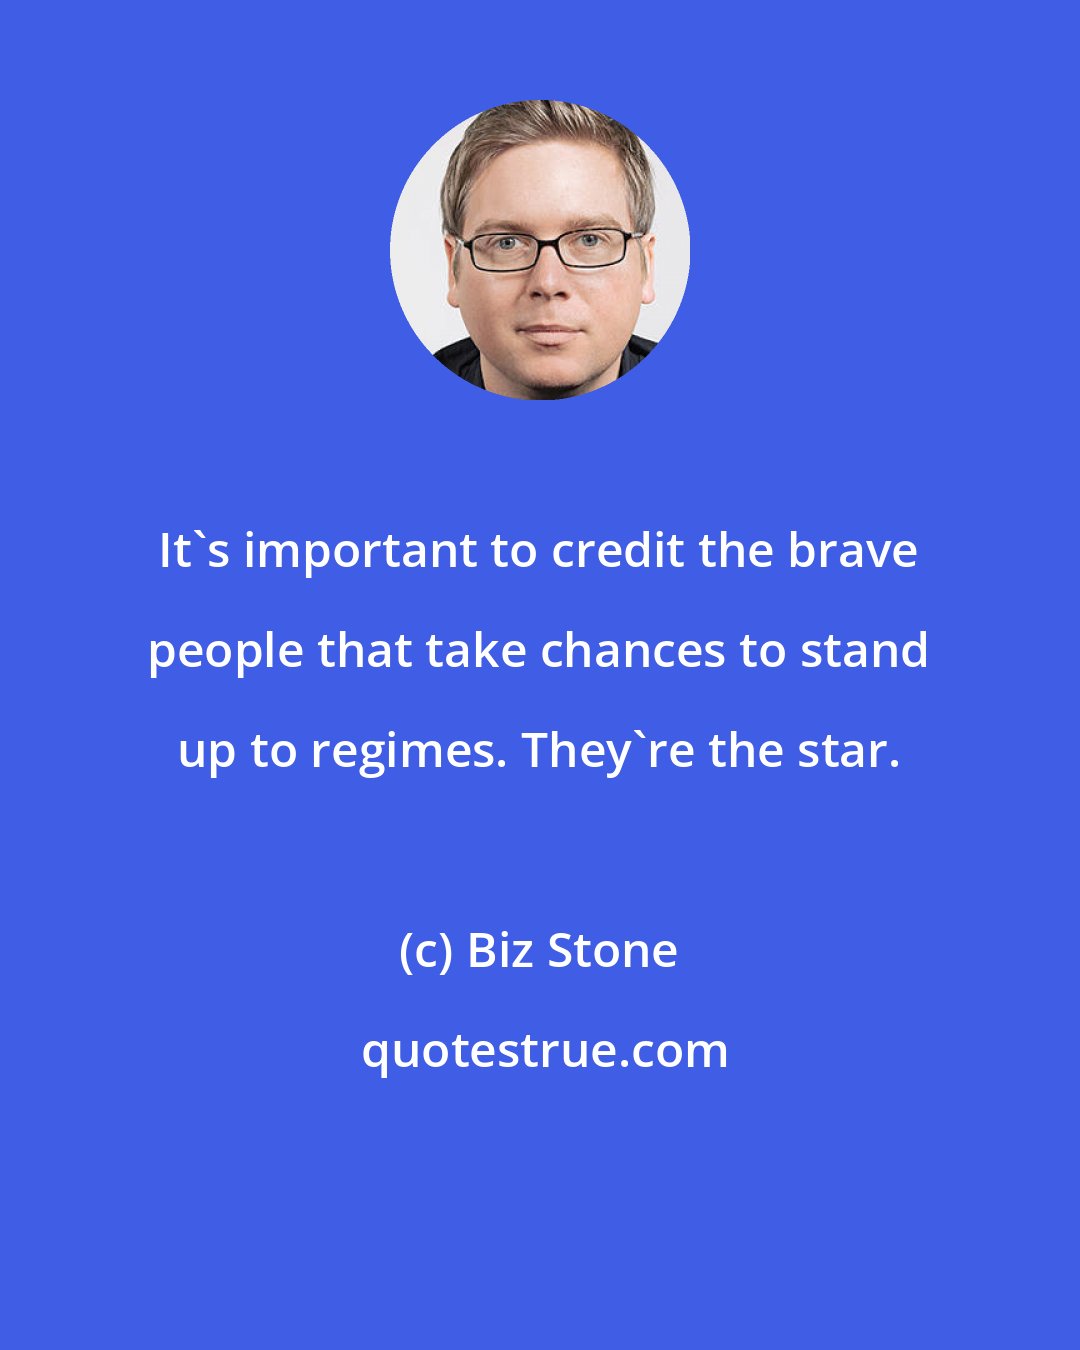 Biz Stone: It's important to credit the brave people that take chances to stand up to regimes. They're the star.